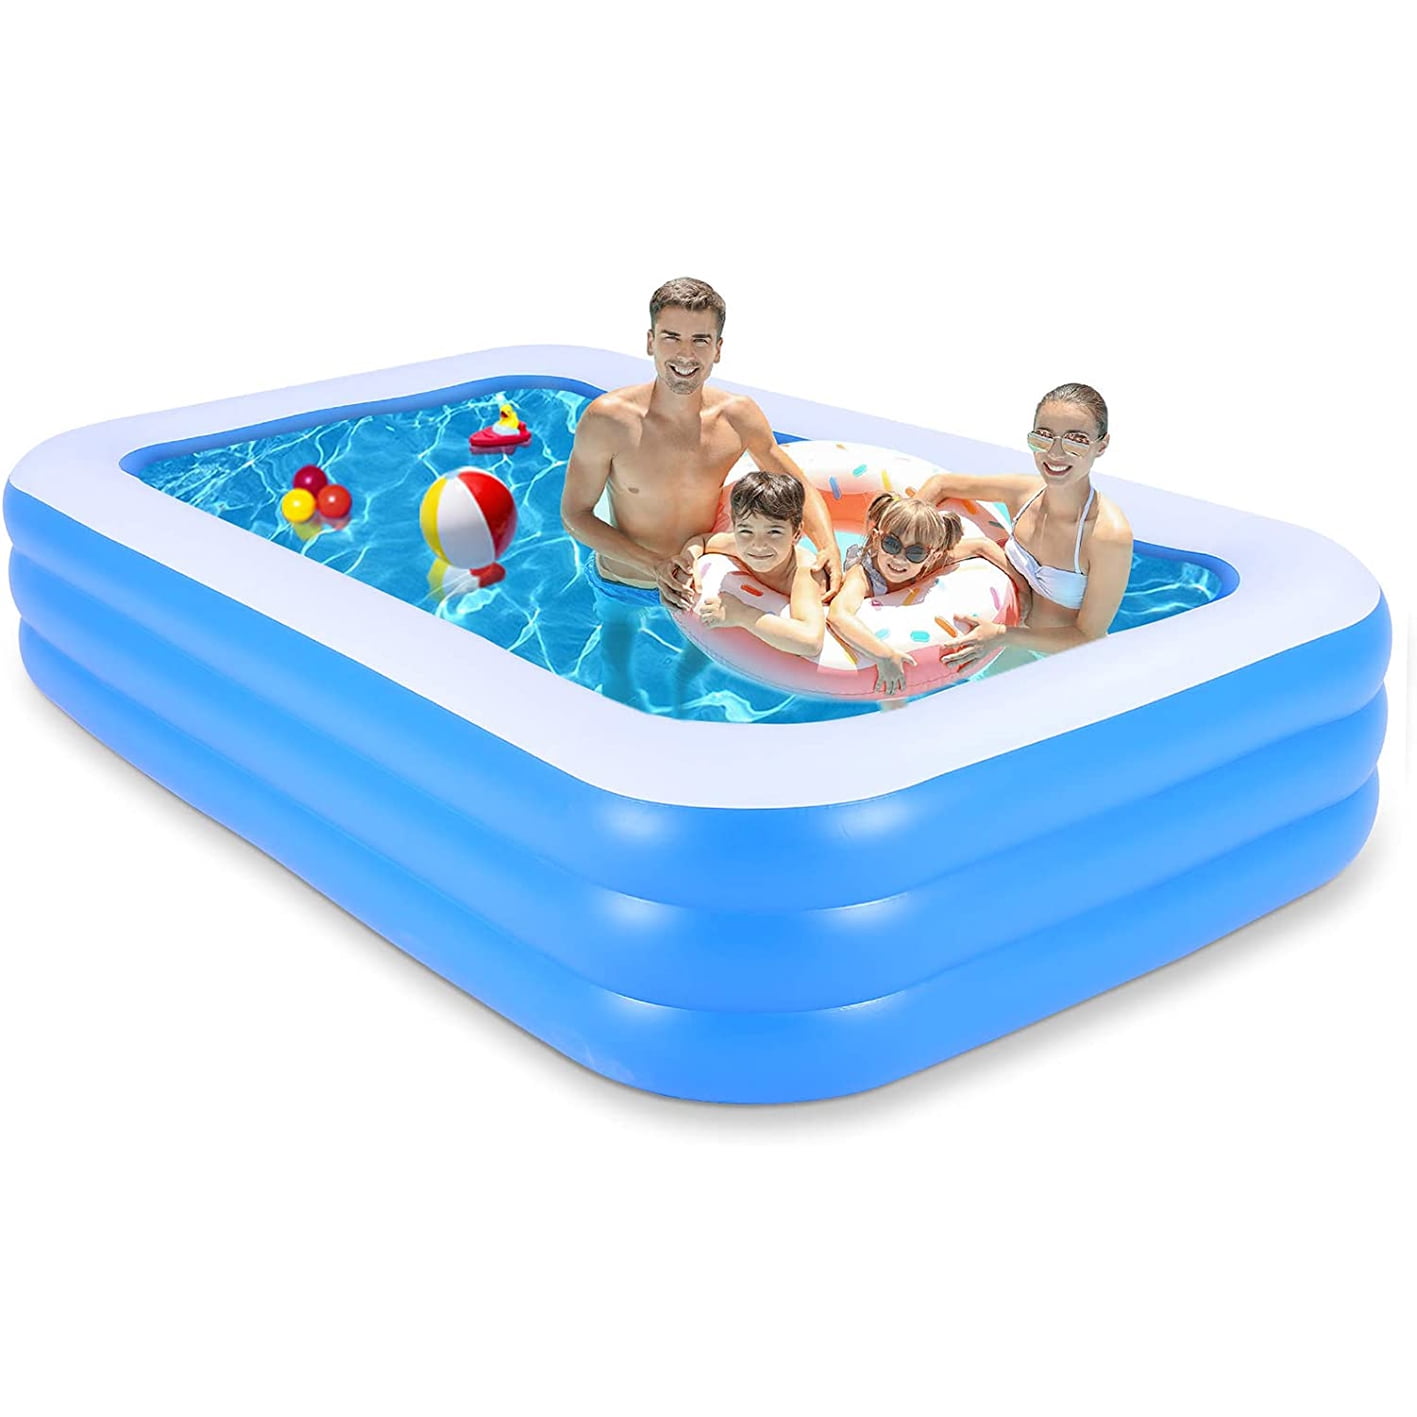 Swimming Pool for Kids Adults Garden Outdoor & Indoor Swimming Pool,with Pillow and Water Outlet Pipe Inflatable Kiddie Swimming Pool 120 x 72 x 22 in Swimming Pool 